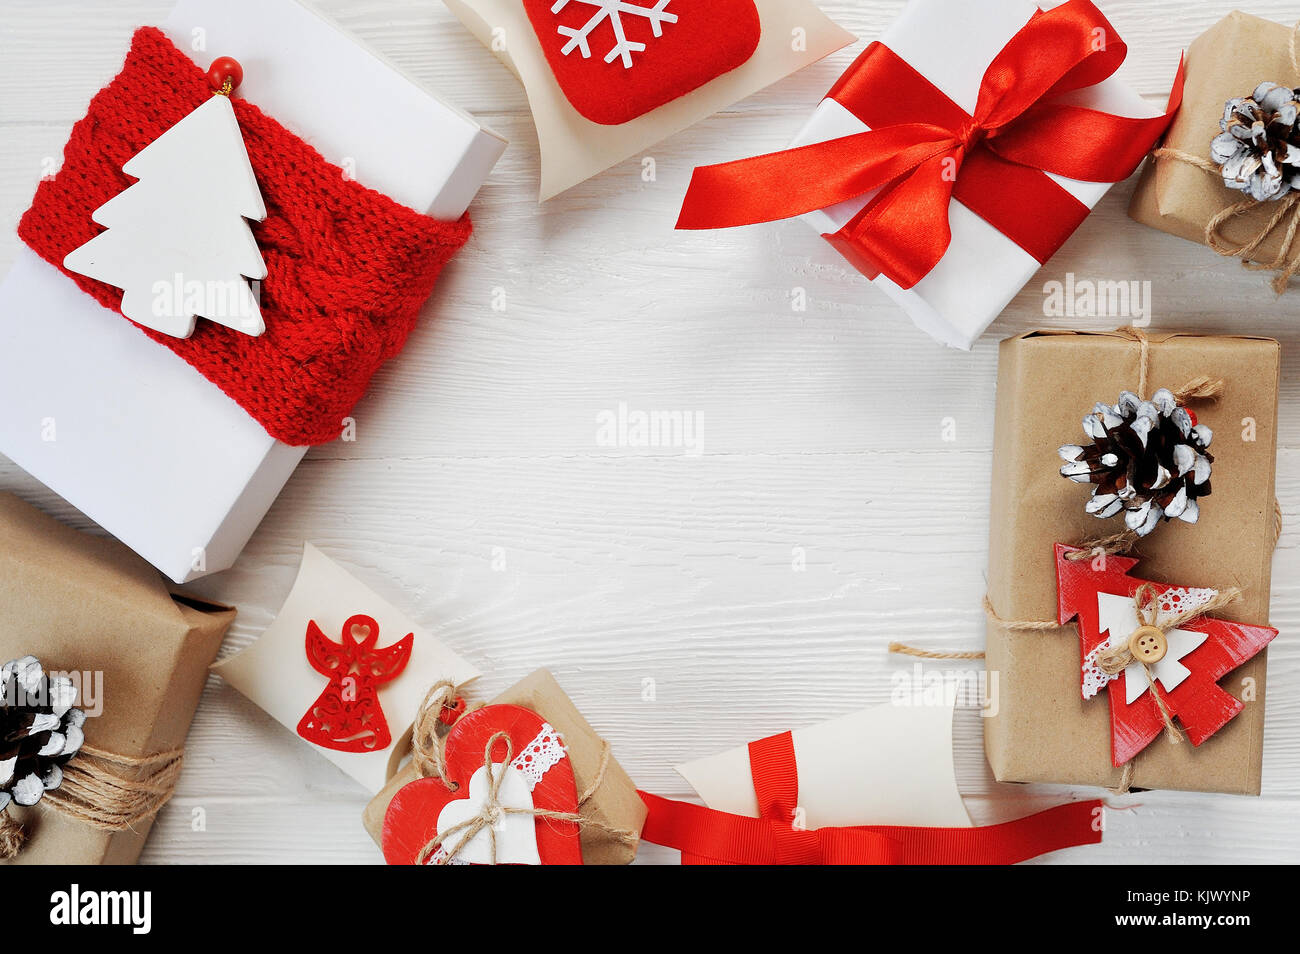 Christmas boxes gift decorated with red bows are arranged in a circle on a white wooden background. Flat lay, top view photo mockup Stock Photo